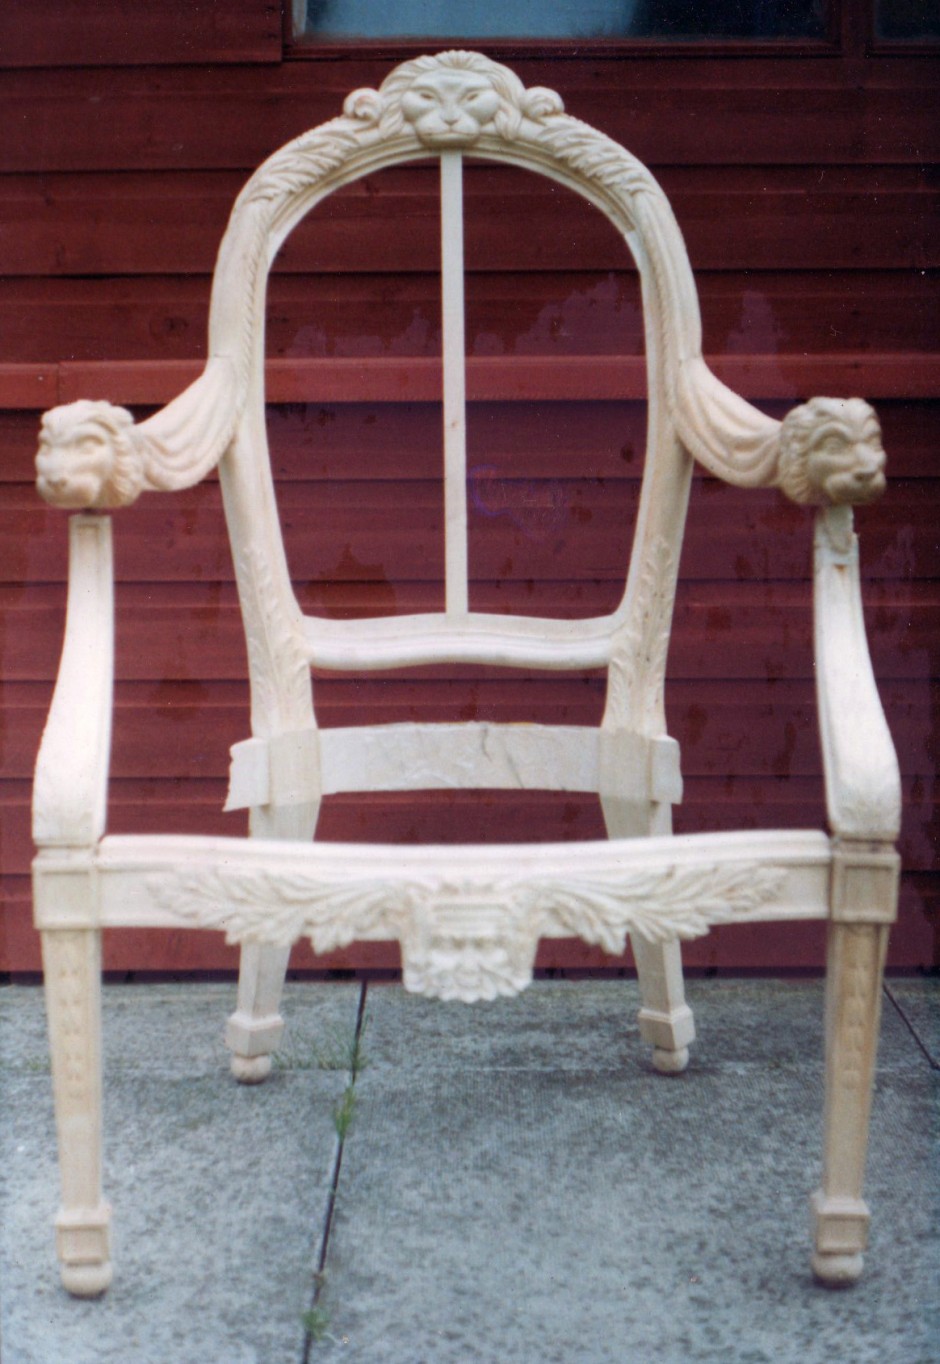 Work in progress - Chair frame assembled - chair backs elton john carved chairs